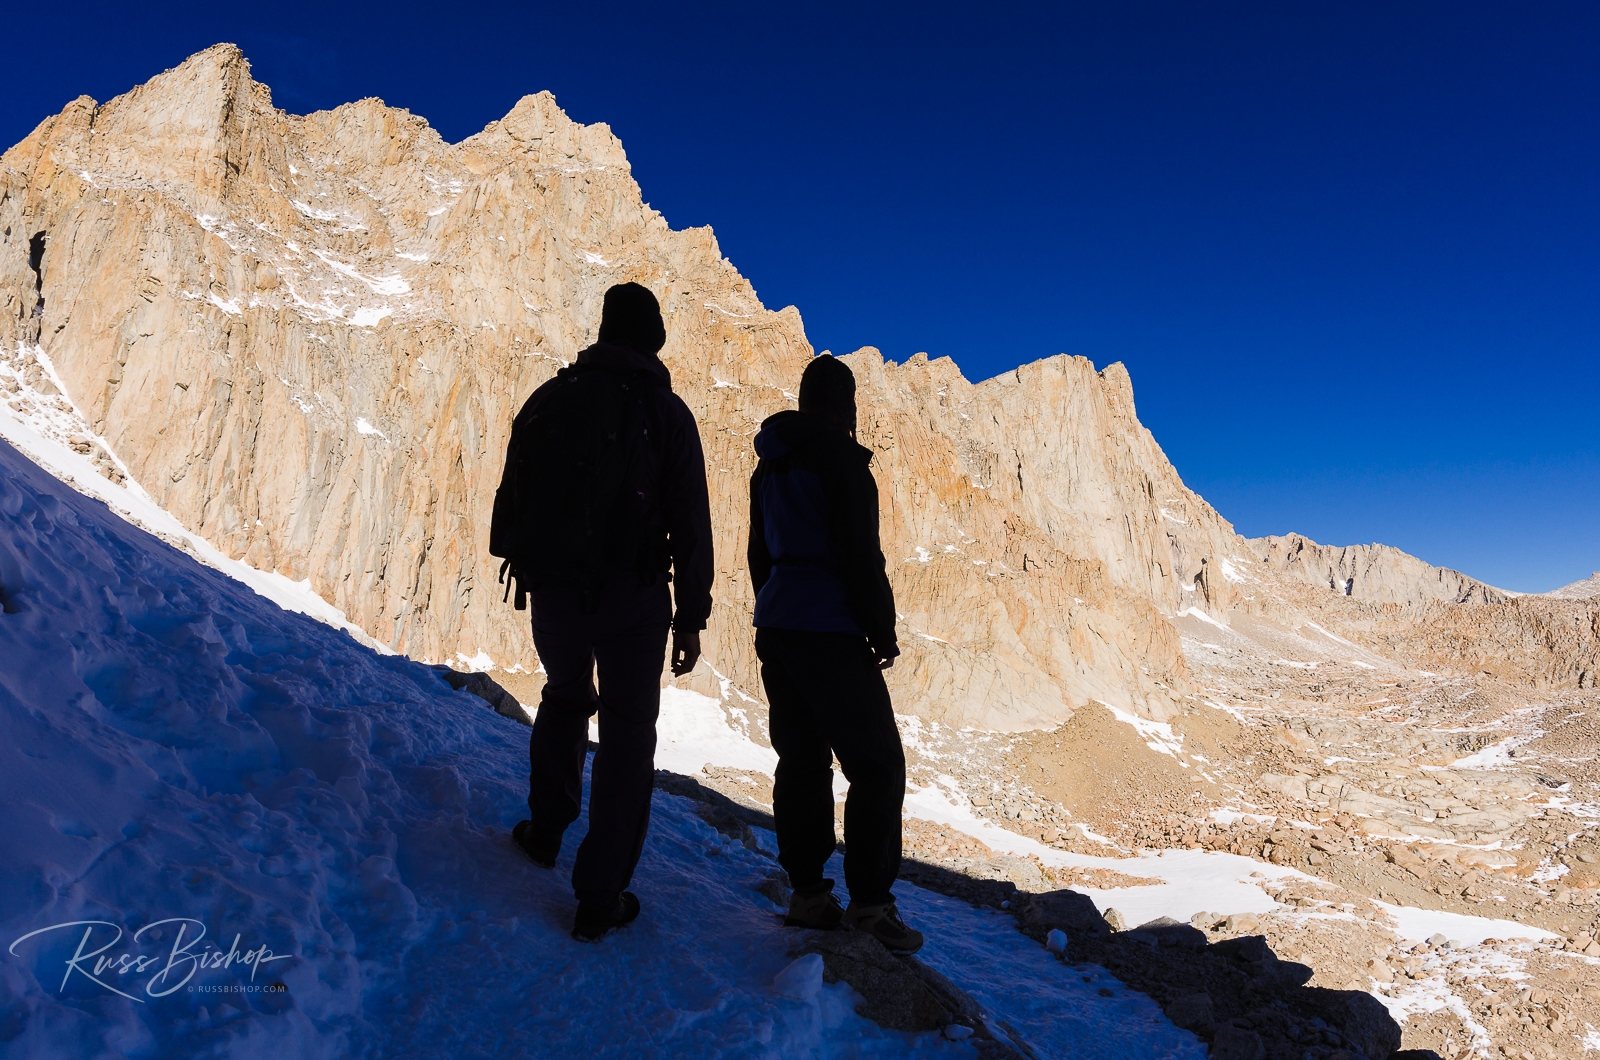 Light and Fast - Tips for Dynamic Adventure Photography. Hikers on the Mount Whitney trail, John Muir Wilderness, Sierra Nevada Mountains, California